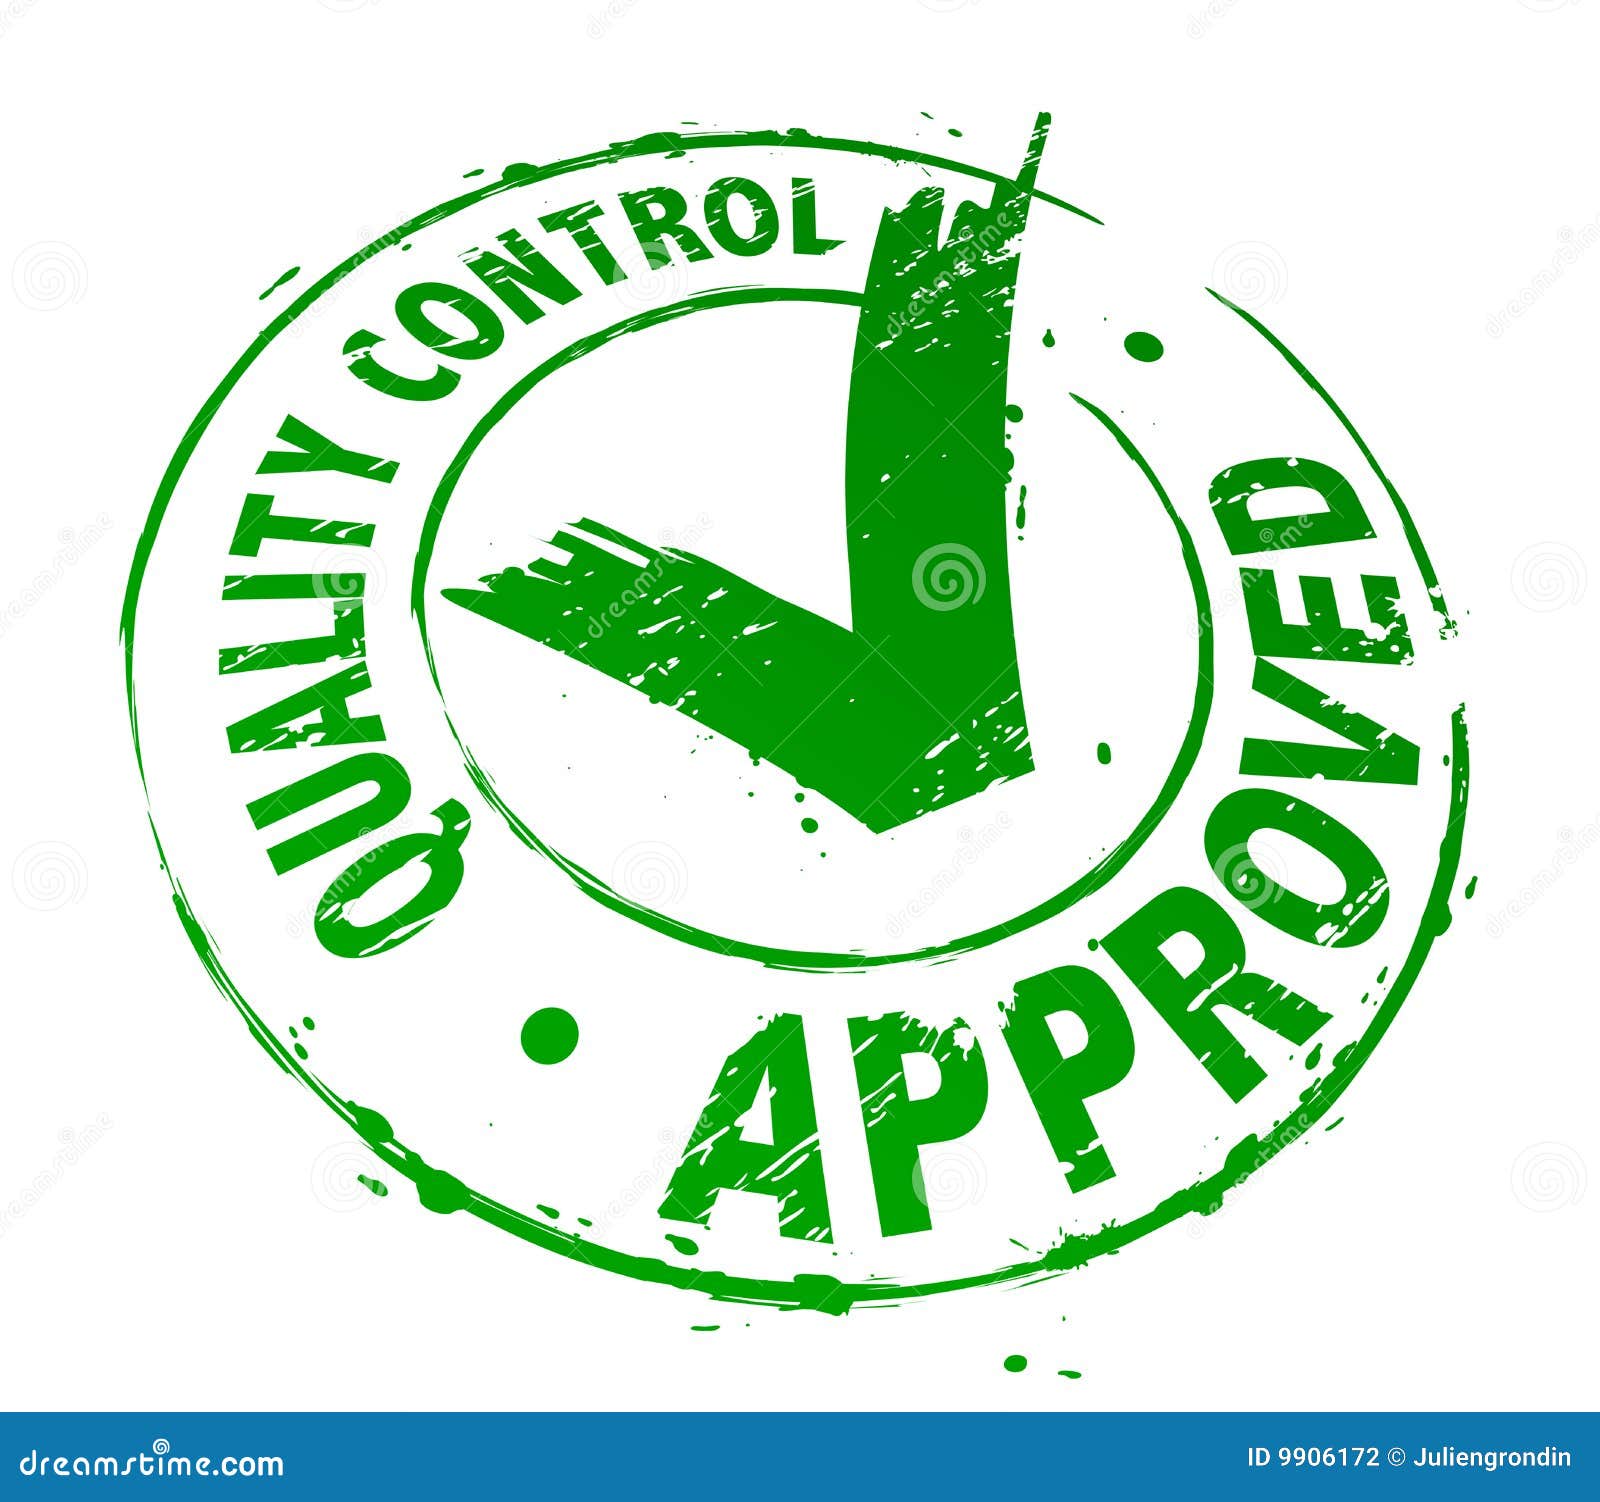 quality check clipart - photo #29